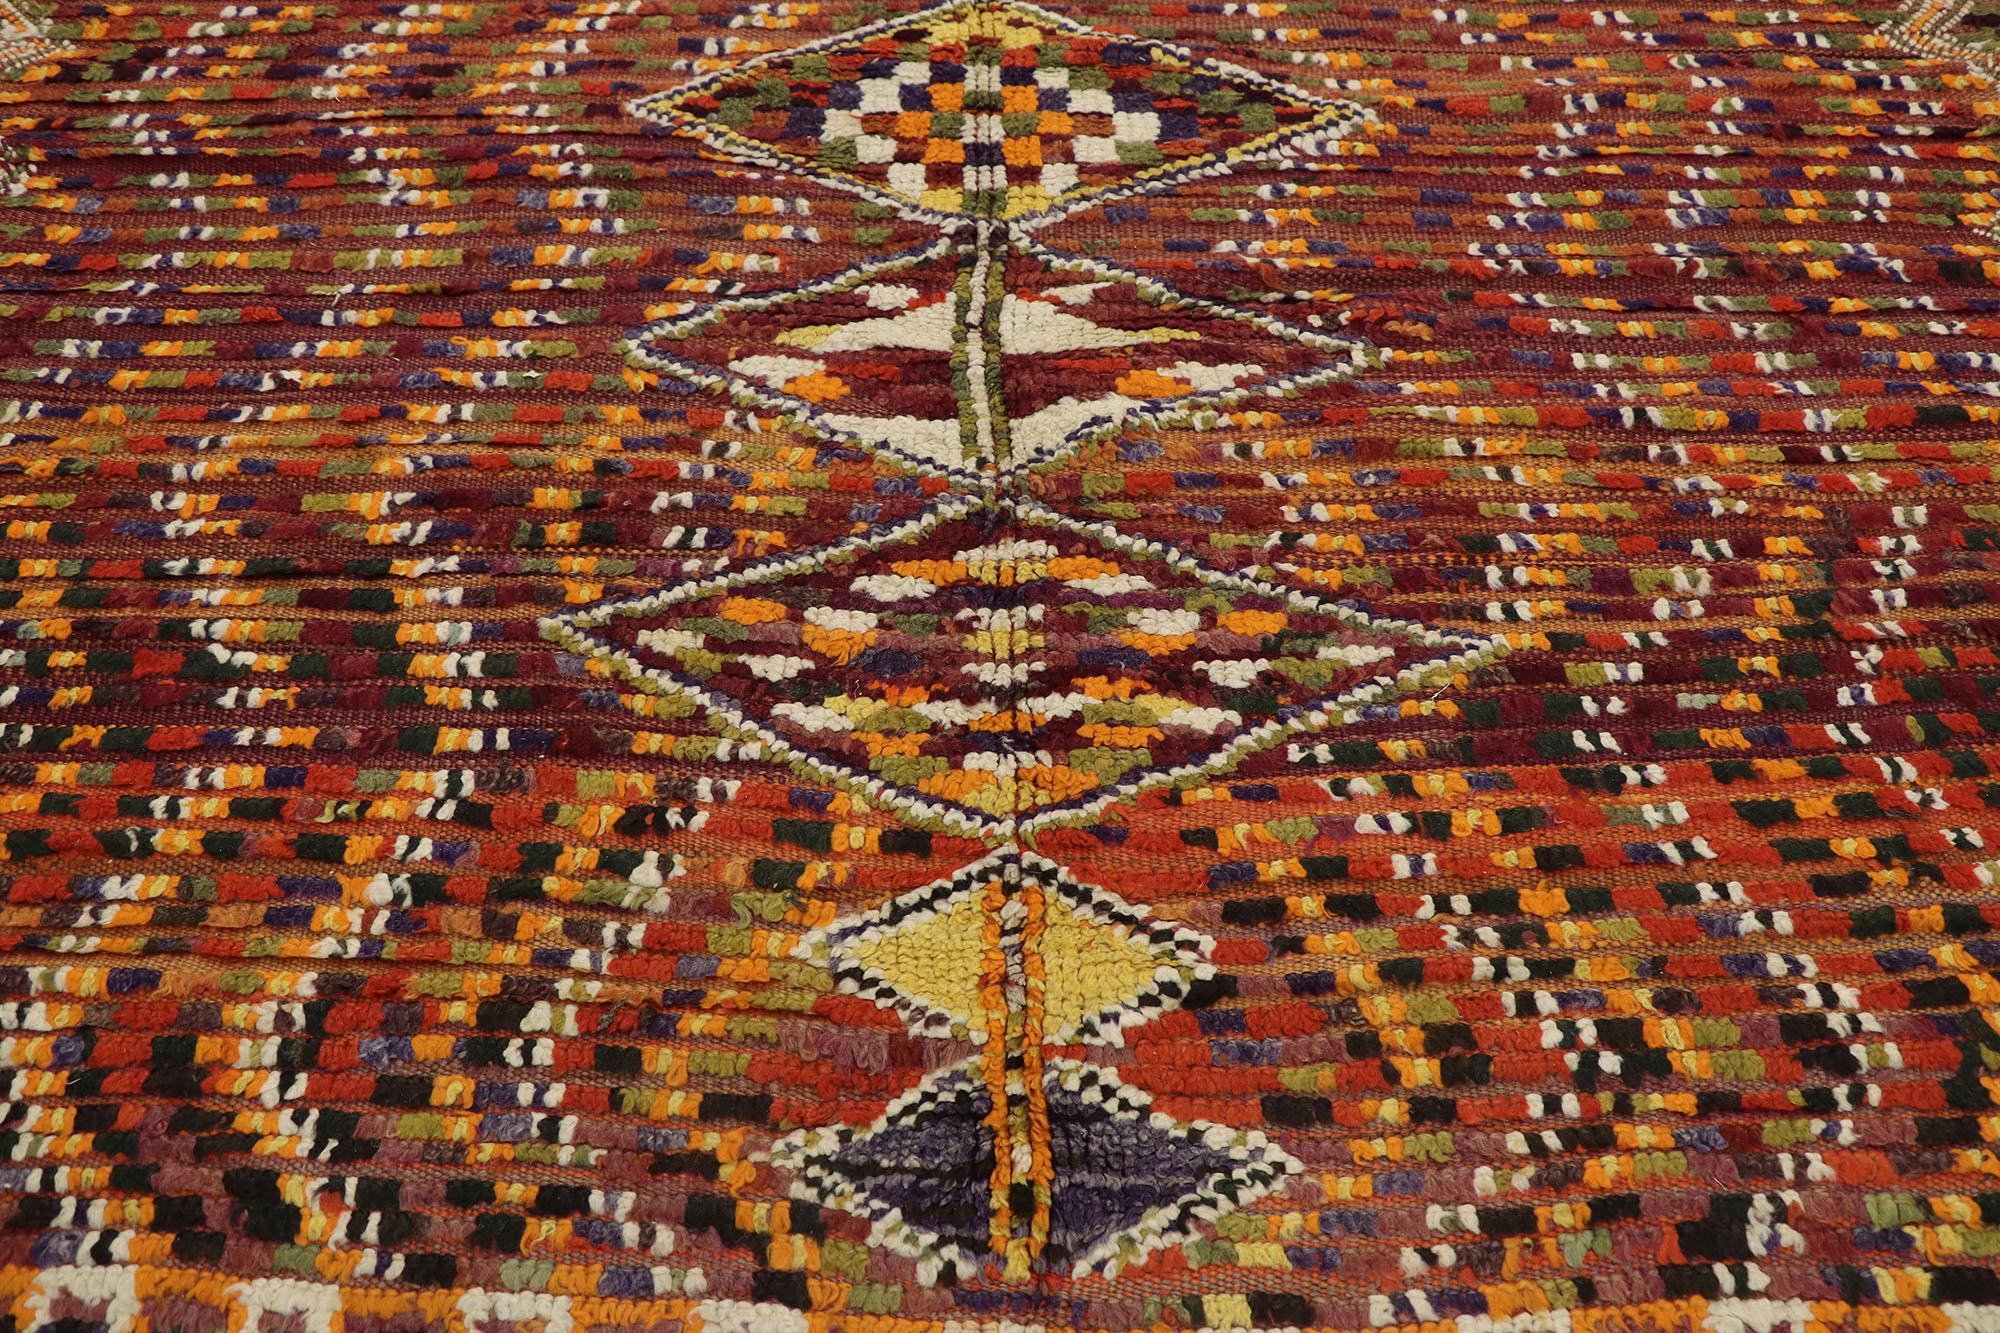 Vintage Moroccan Rug by Berber Tribes of Morocco In Good Condition For Sale In Dallas, TX